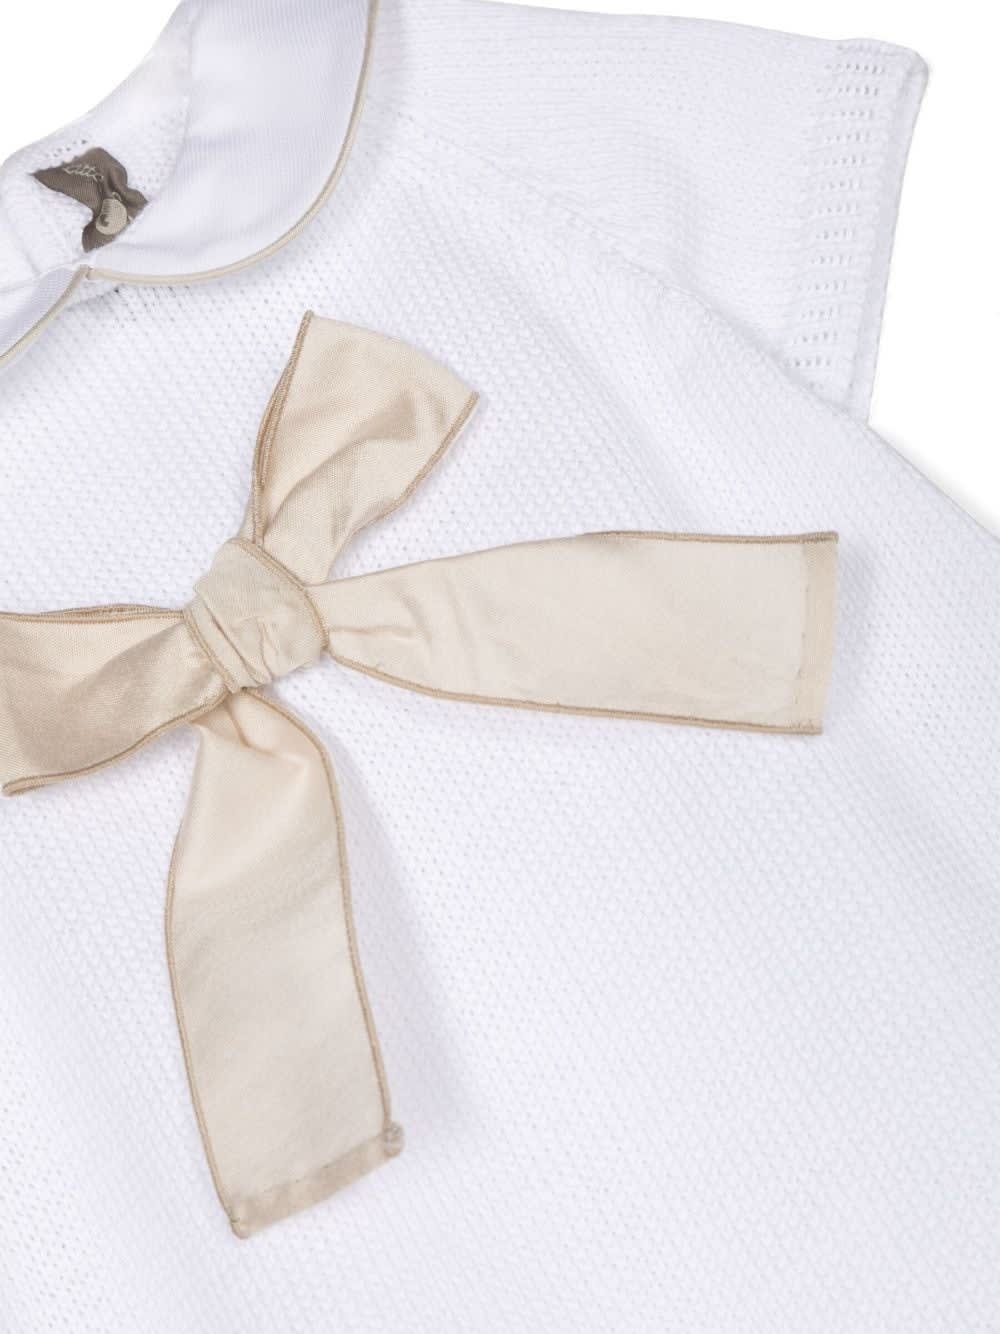 Shop Little Bear Jumpsuit With Bow In White